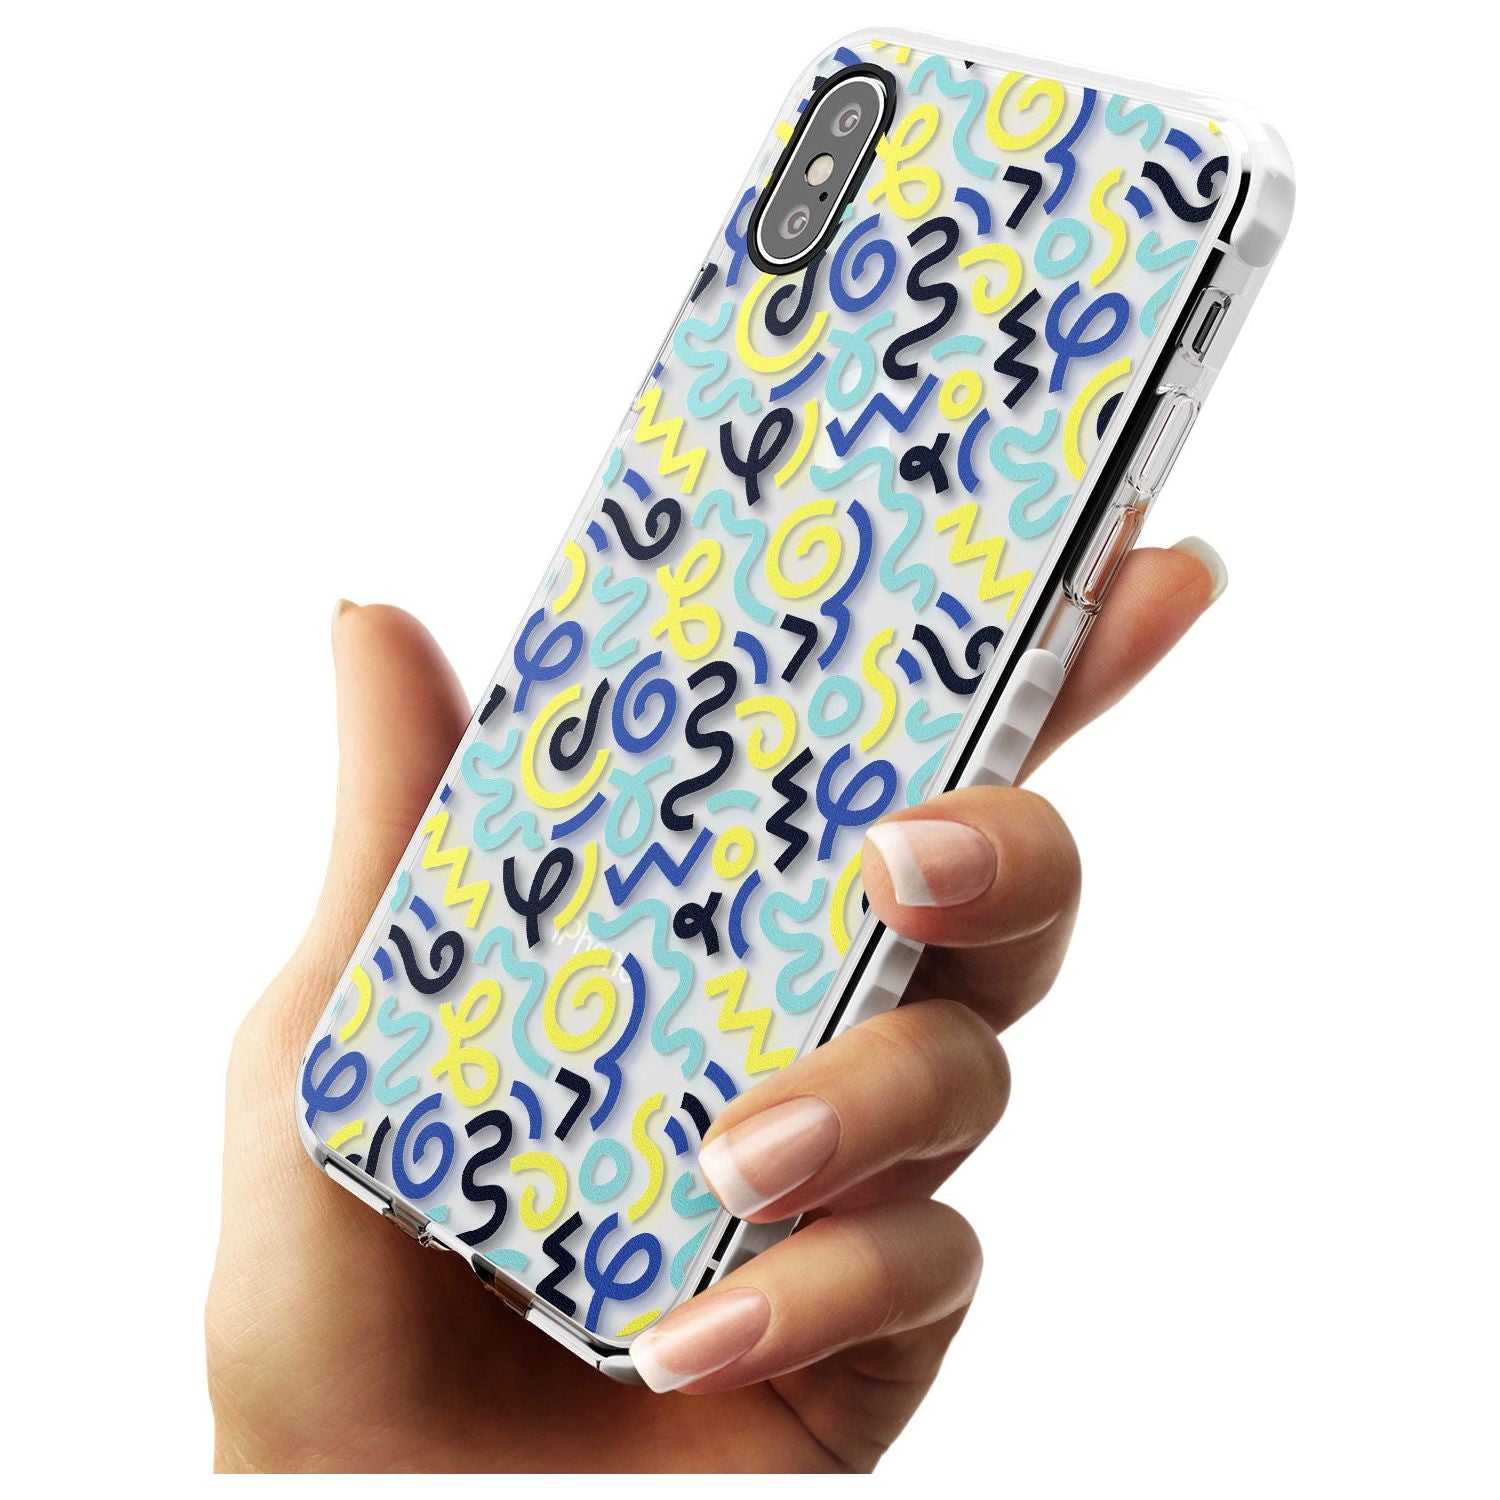 Blue & Yellow Shapes Memphis Retro Pattern Design Impact Phone Case for iPhone X XS Max XR